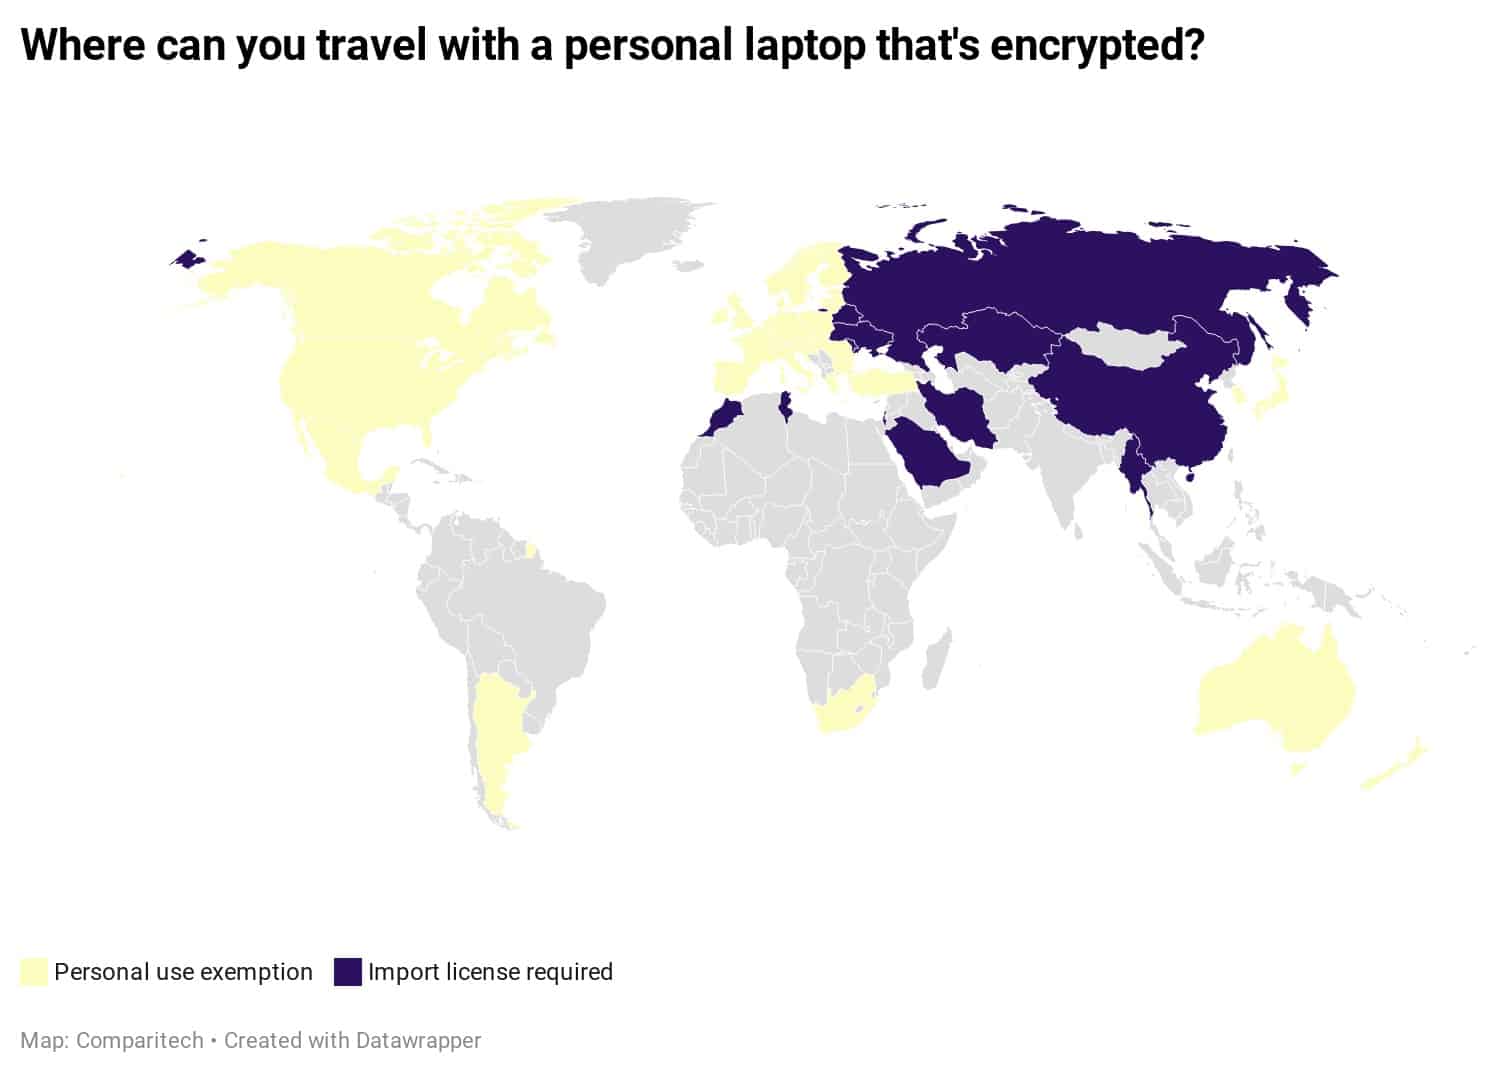 Where can you travel with an encrypted laptop